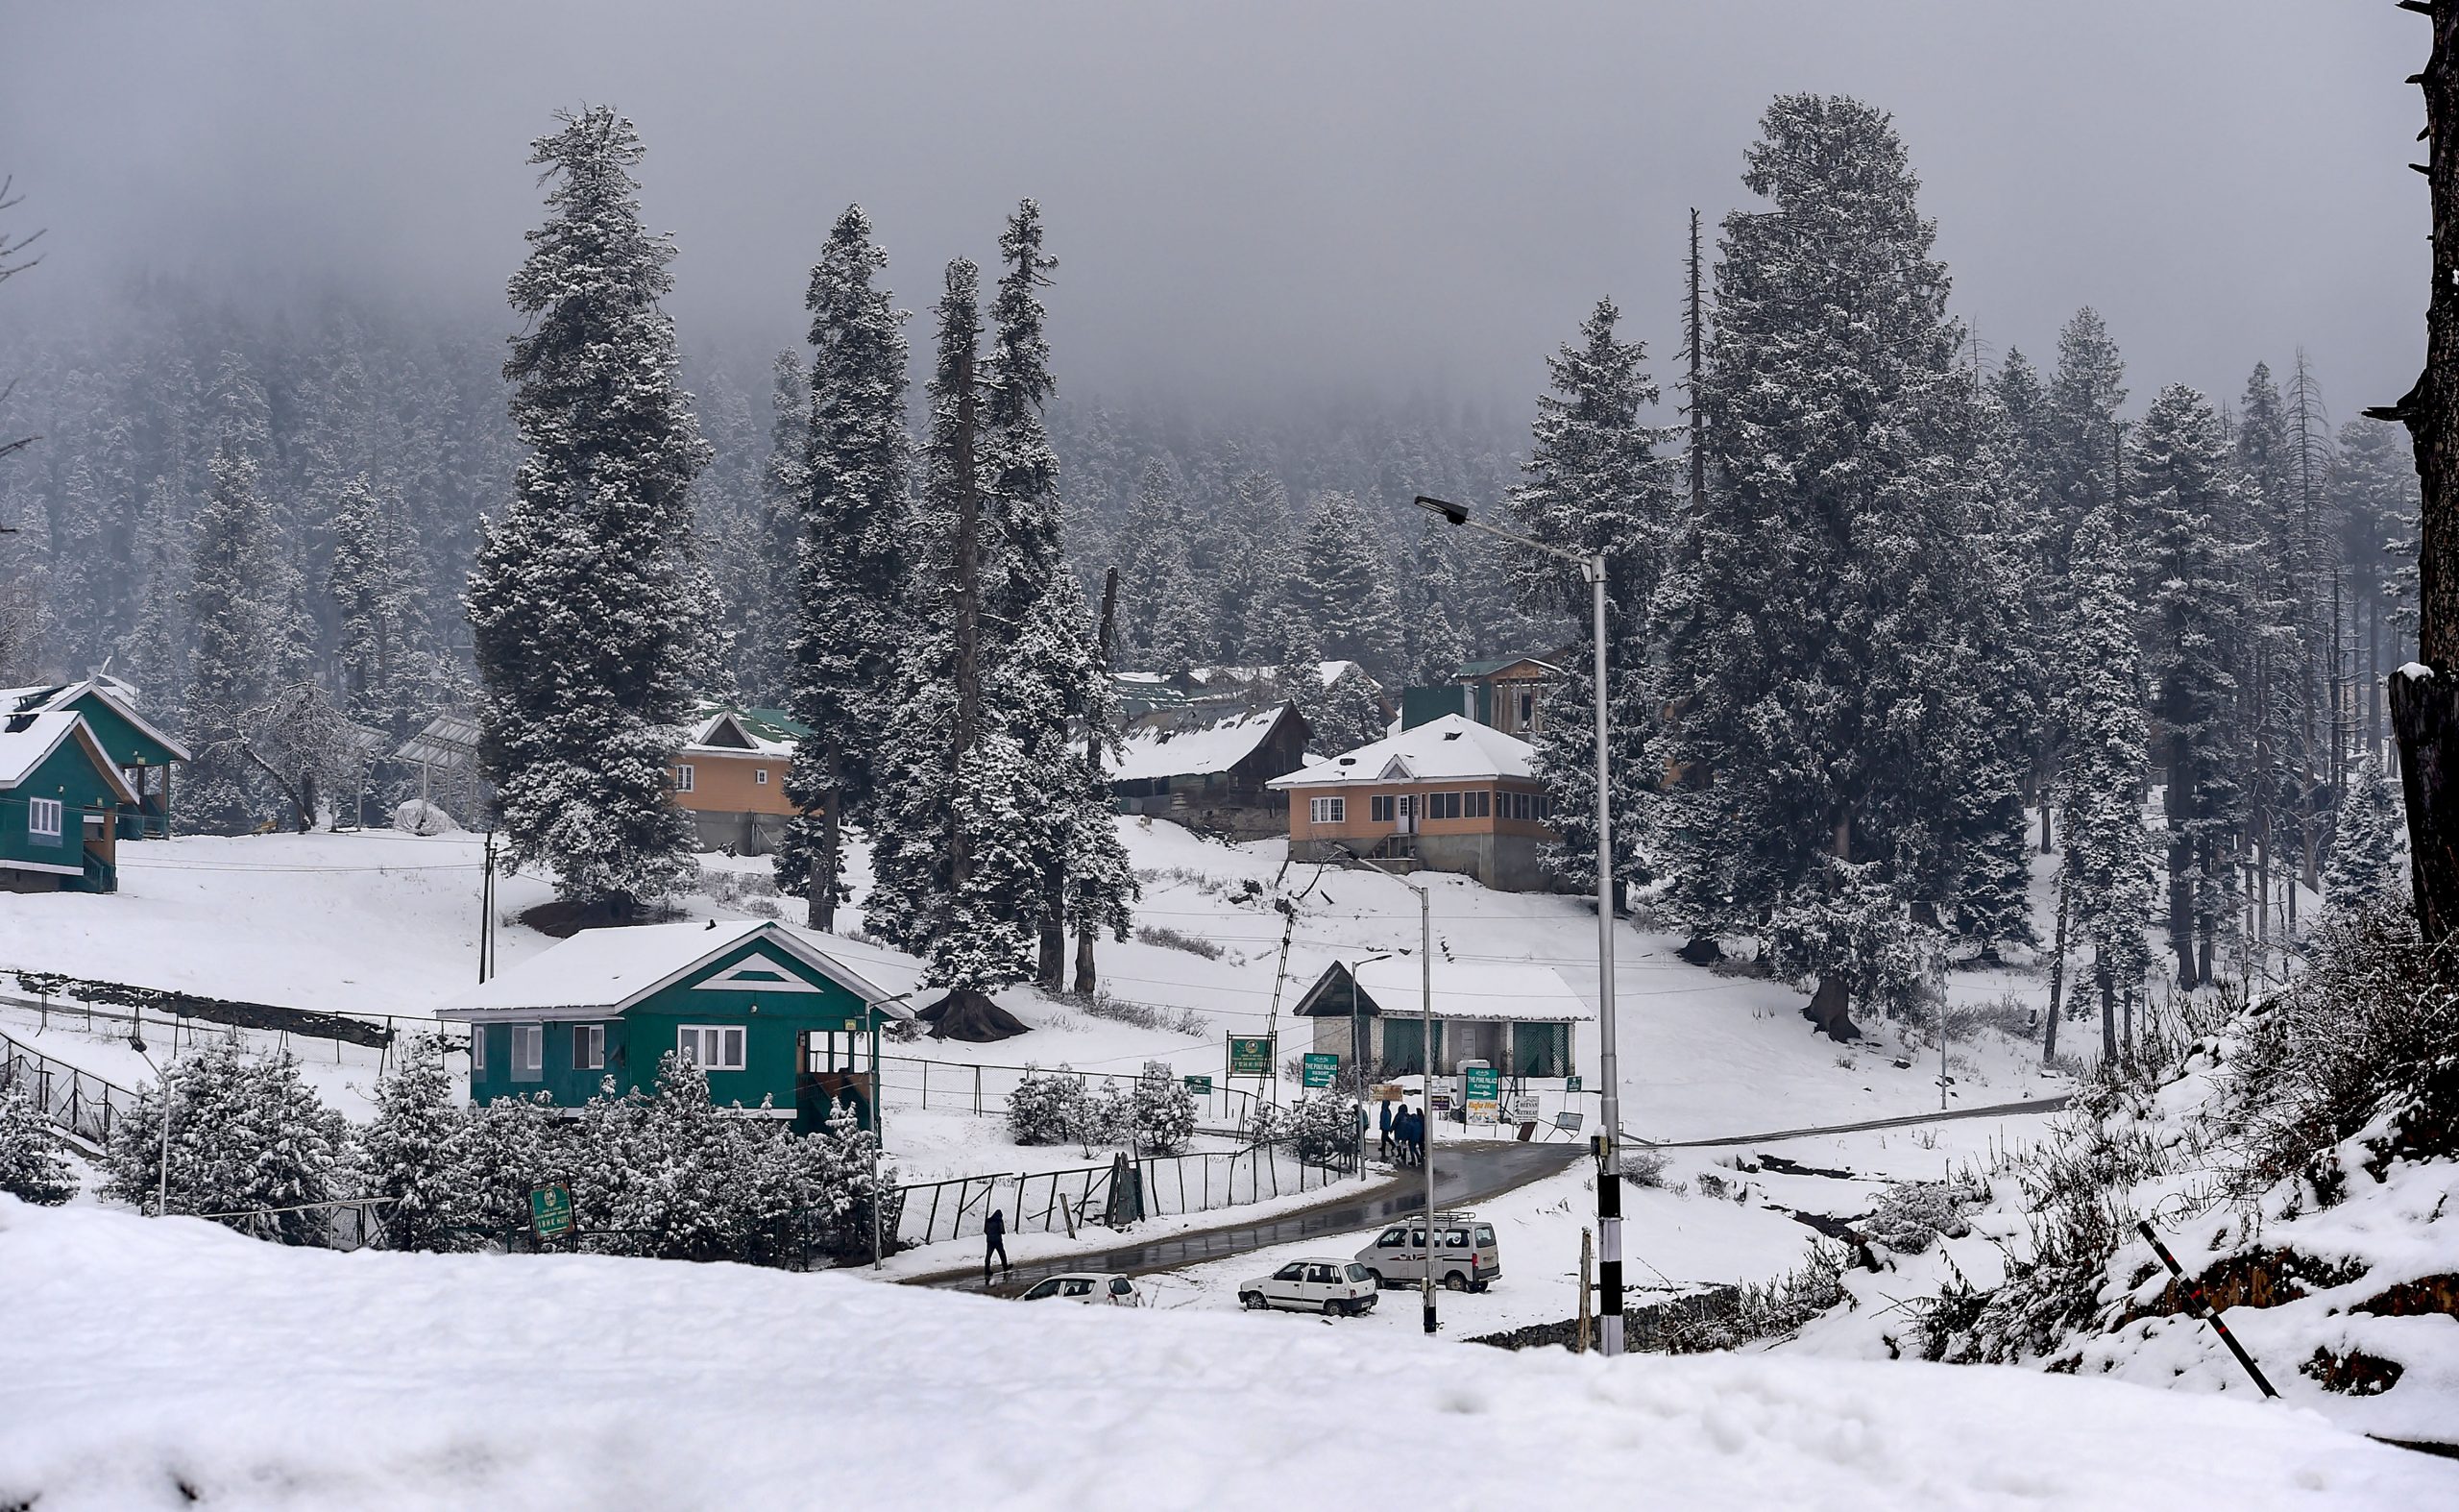 Light snowfall likely in Kashmir over weekend: Report